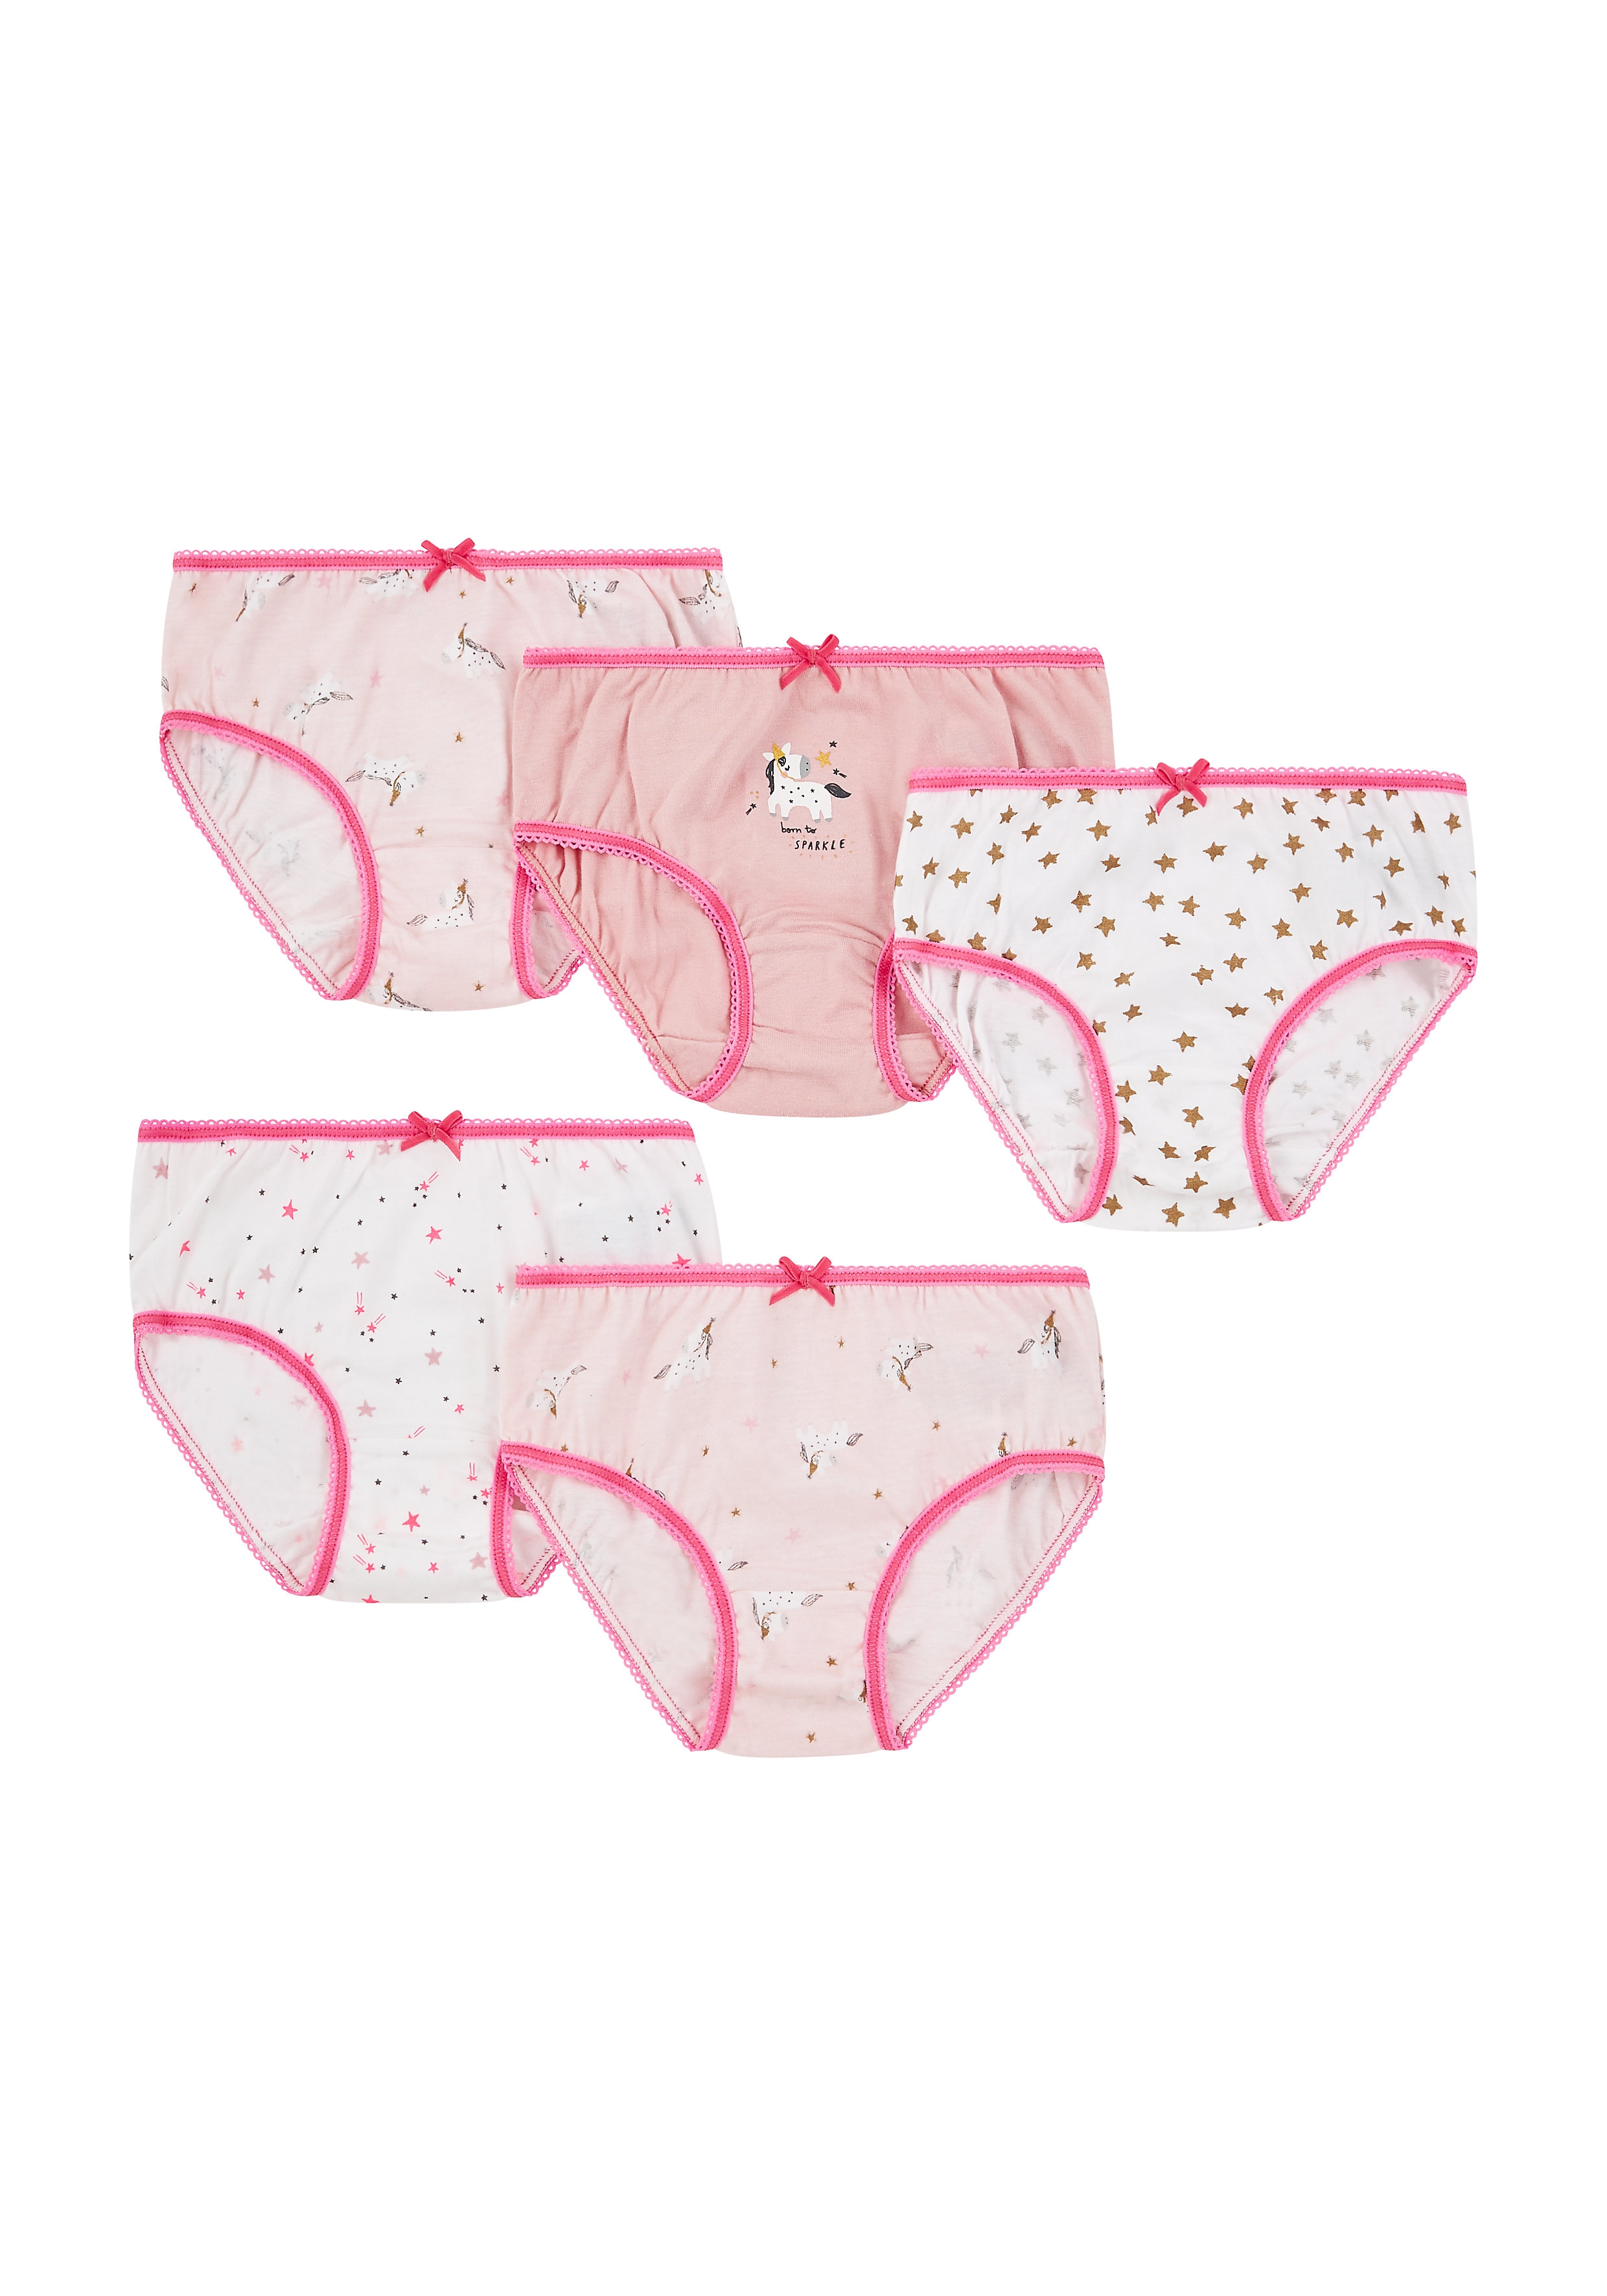 Mothercare | Girls Unicorn Briefs - 5 Pack - Pink